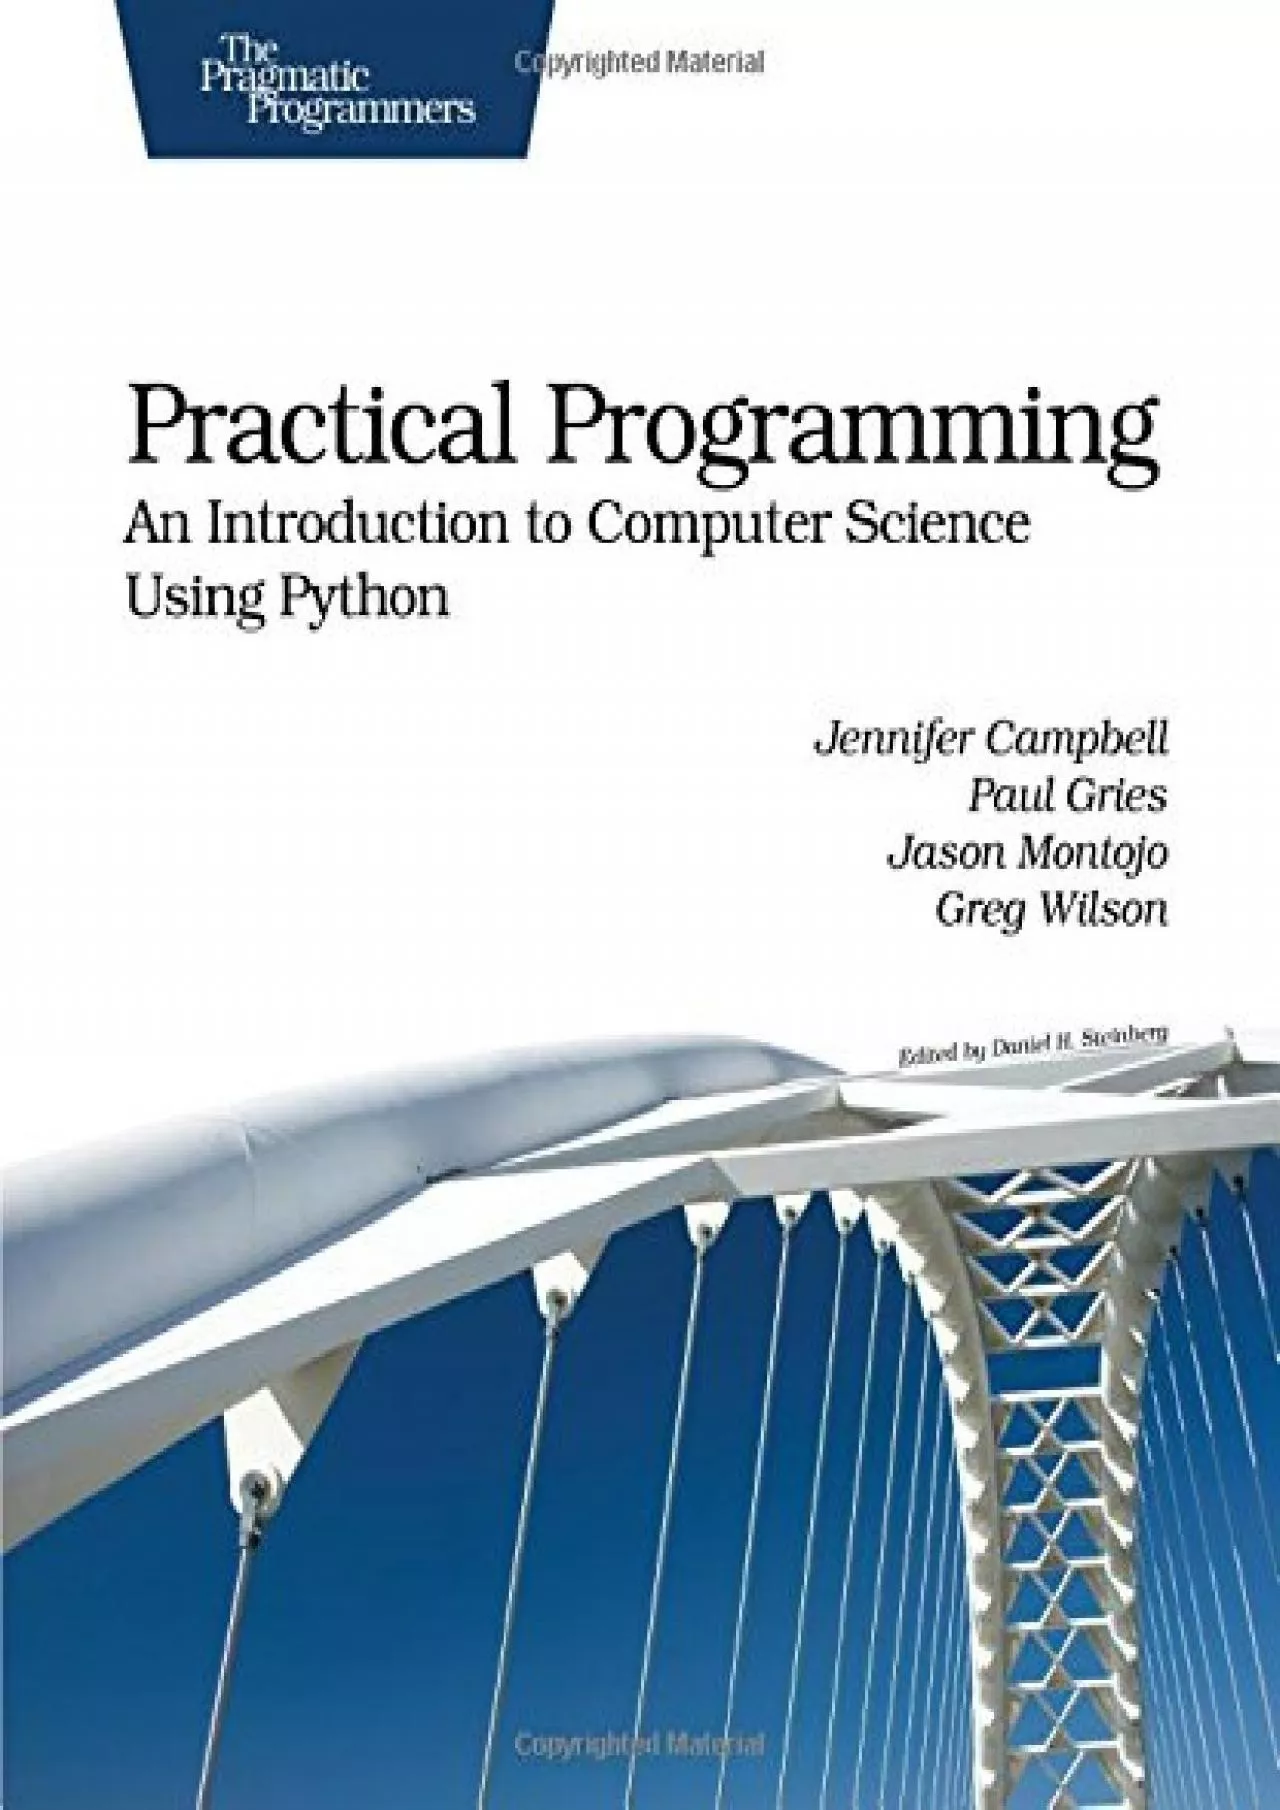 [READING BOOK]-Practical Programming: An Introduction to Computer Science Using Python